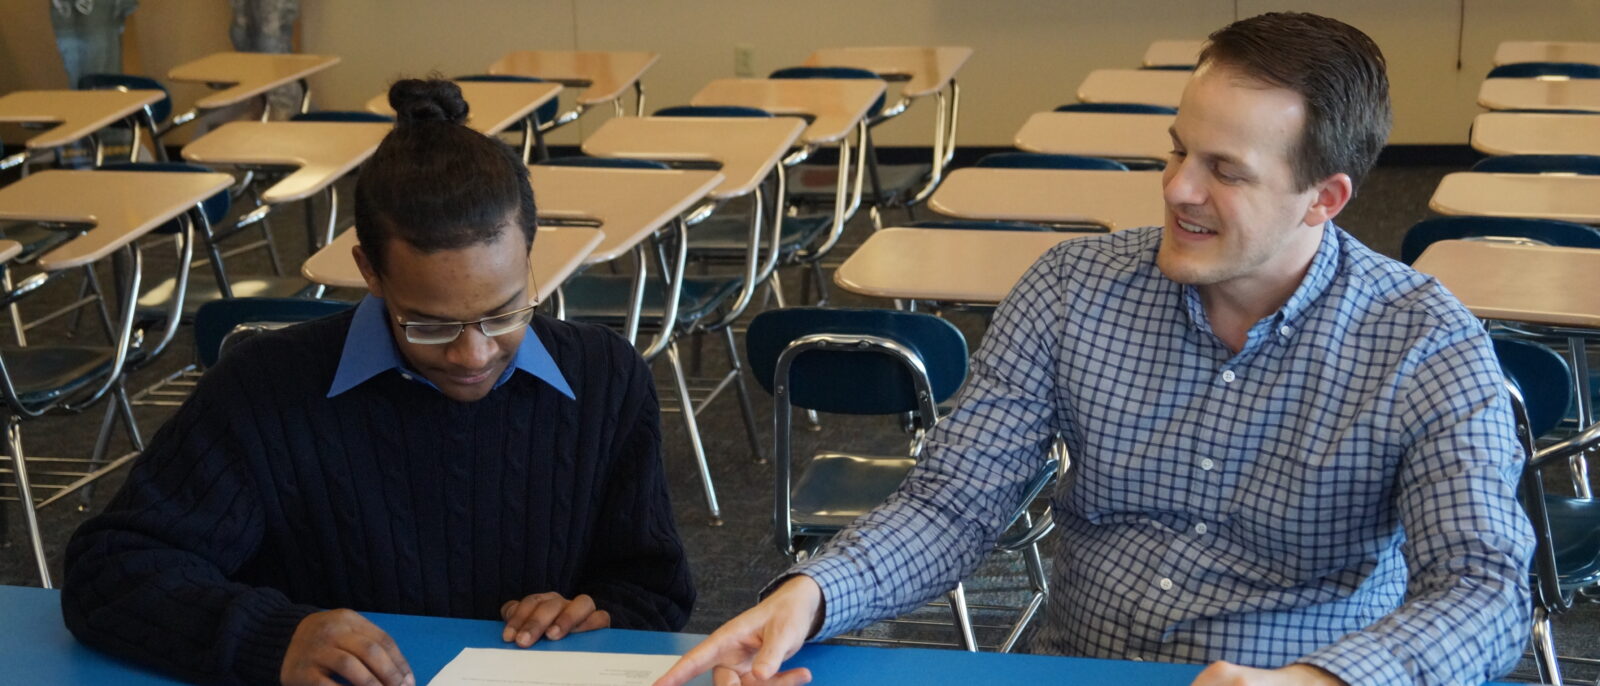 A teenage student wearing glasses looks at a paper while a teacher in a checkered dress shirt sits next to him and points at the paper.